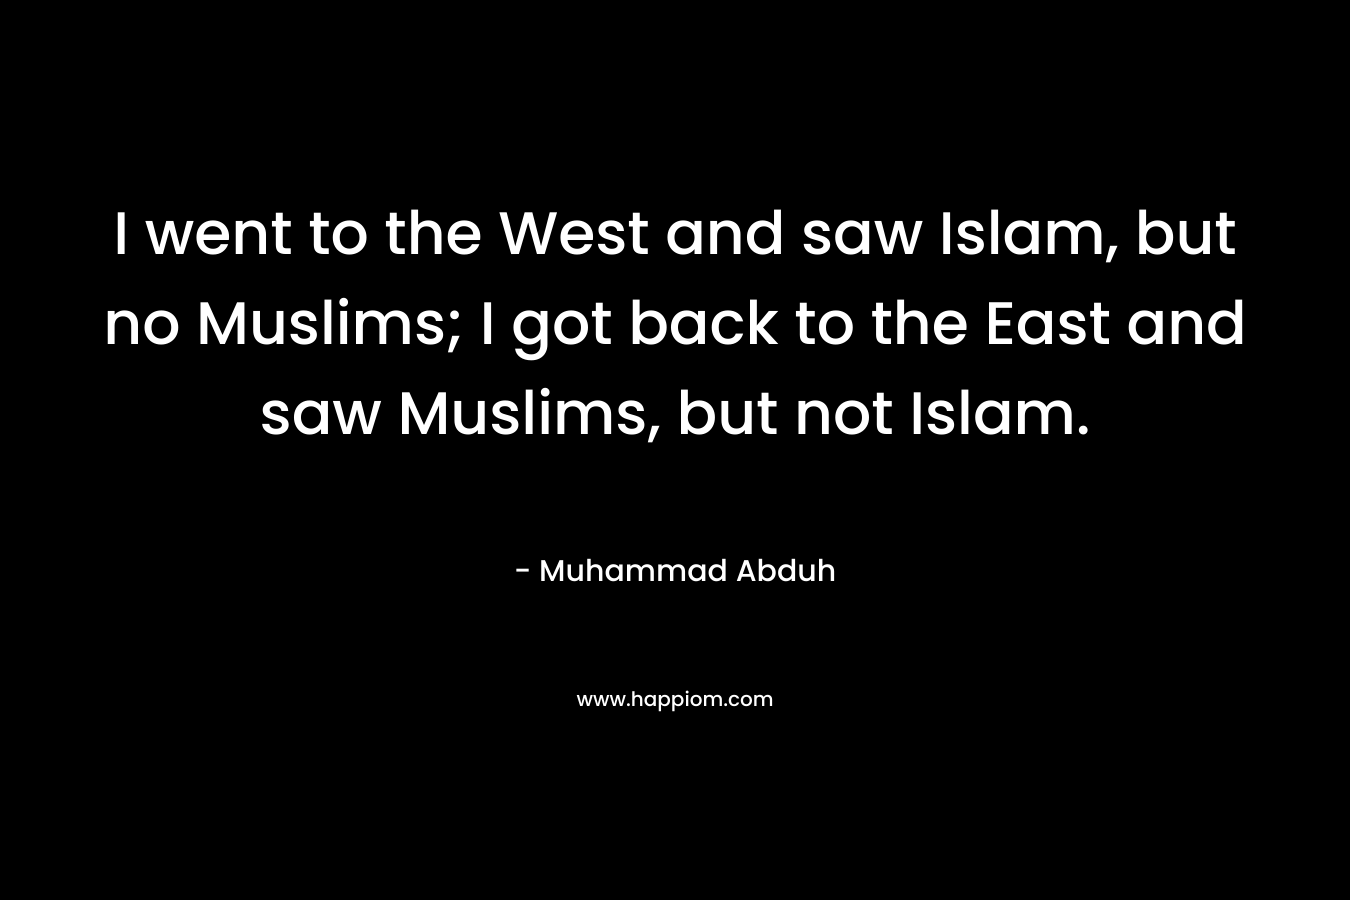 I went to the West and saw Islam, but no Muslims; I got back to the East and saw Muslims, but not Islam. – Muhammad Abduh